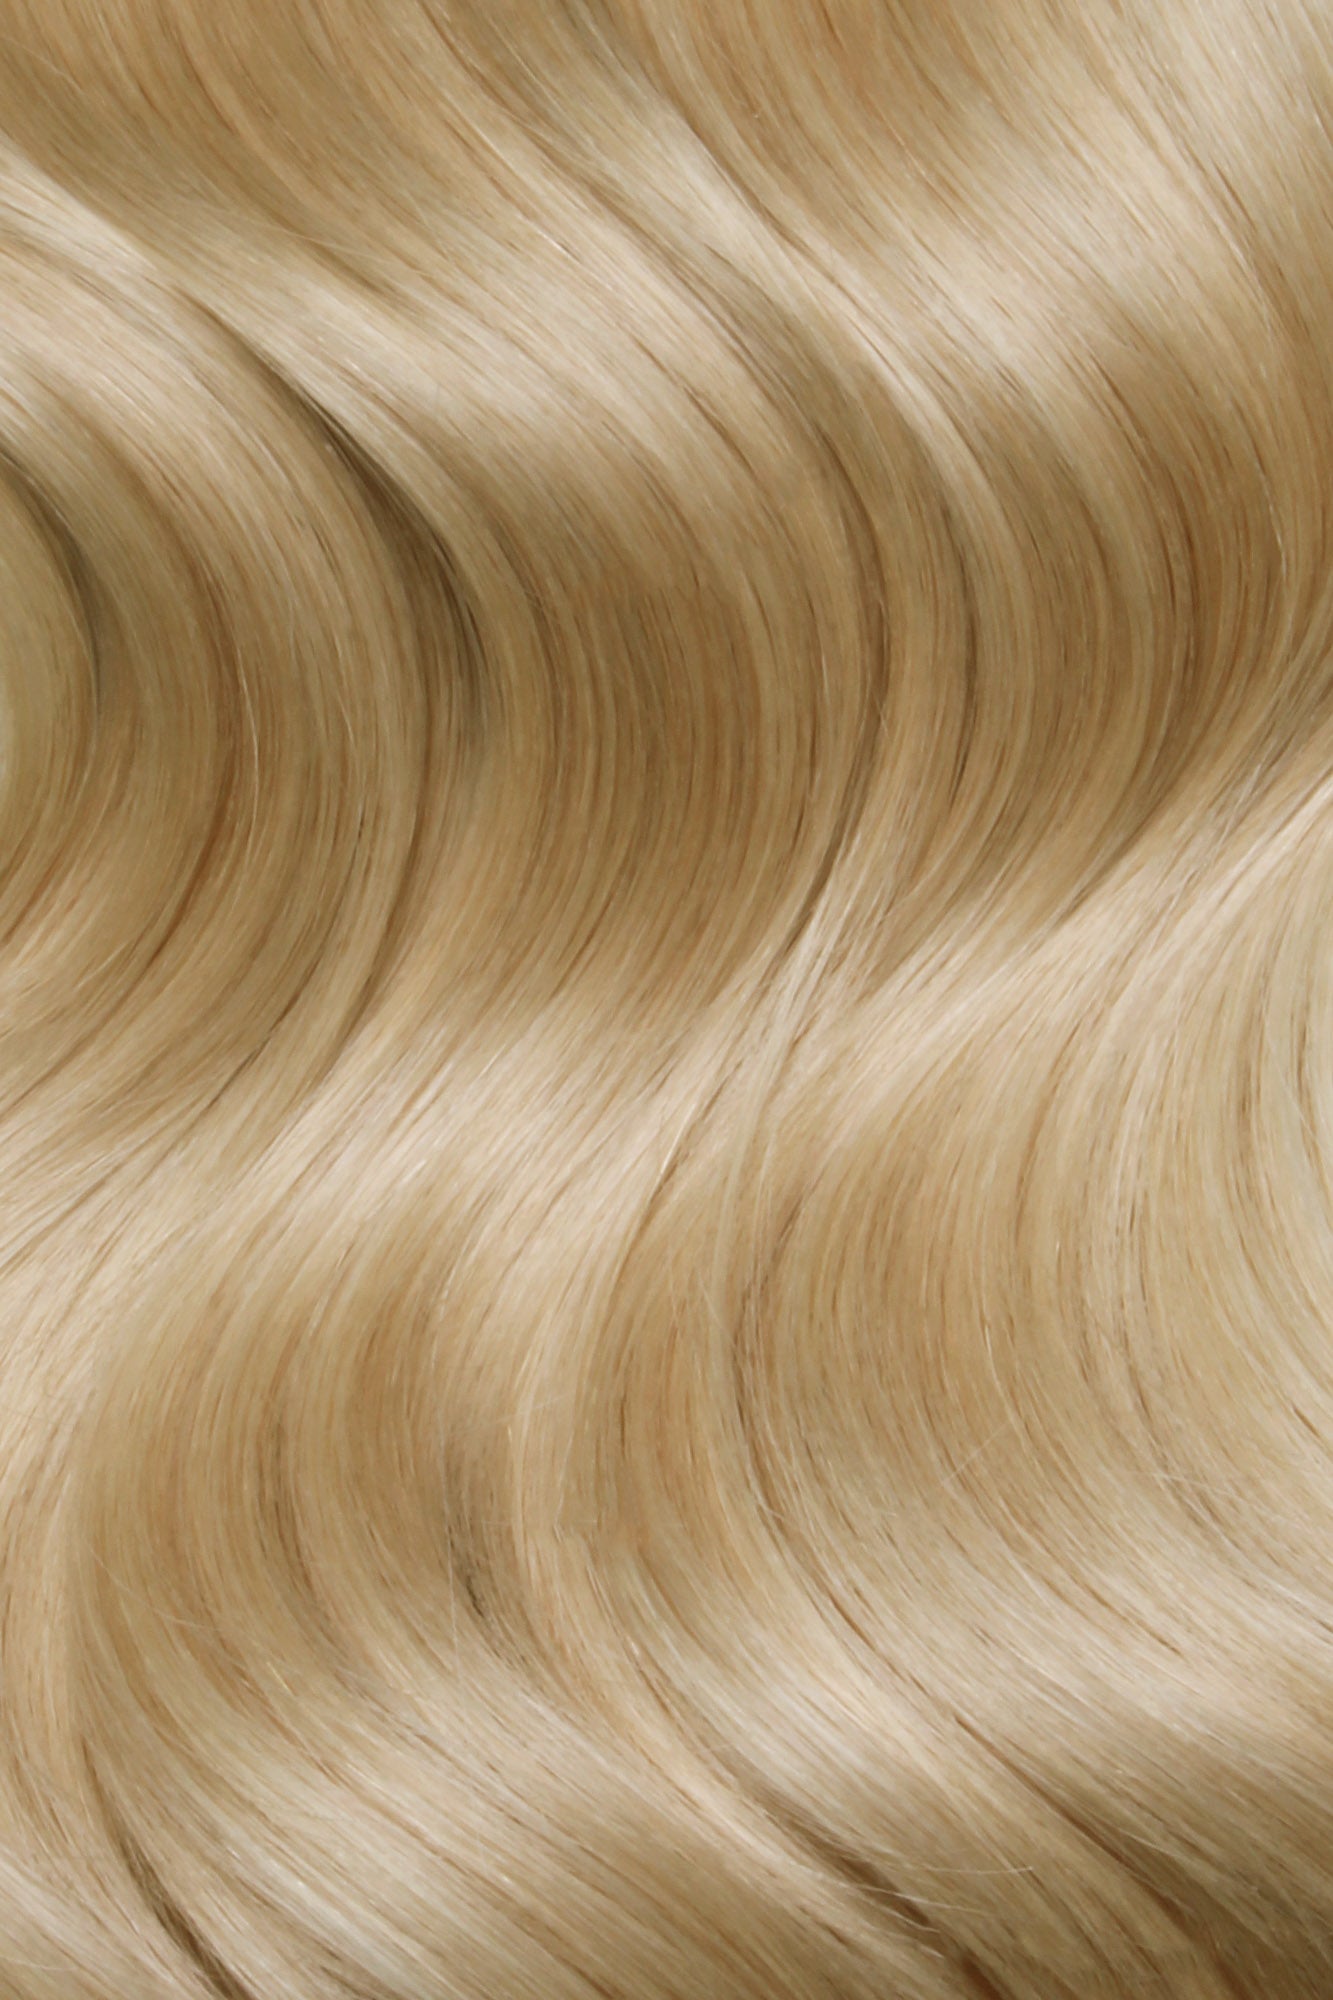 SEAMLESS® Flat Weft 18 Inches - SWAY Hair Extensions Natural-Ash-Blonde-20 Natural SEAMLESS® Flat Weft 18 Inches extensions. Thin, flexible, and discreet. 100% Double Drawn Remy Human Hair. Versatile and reusable